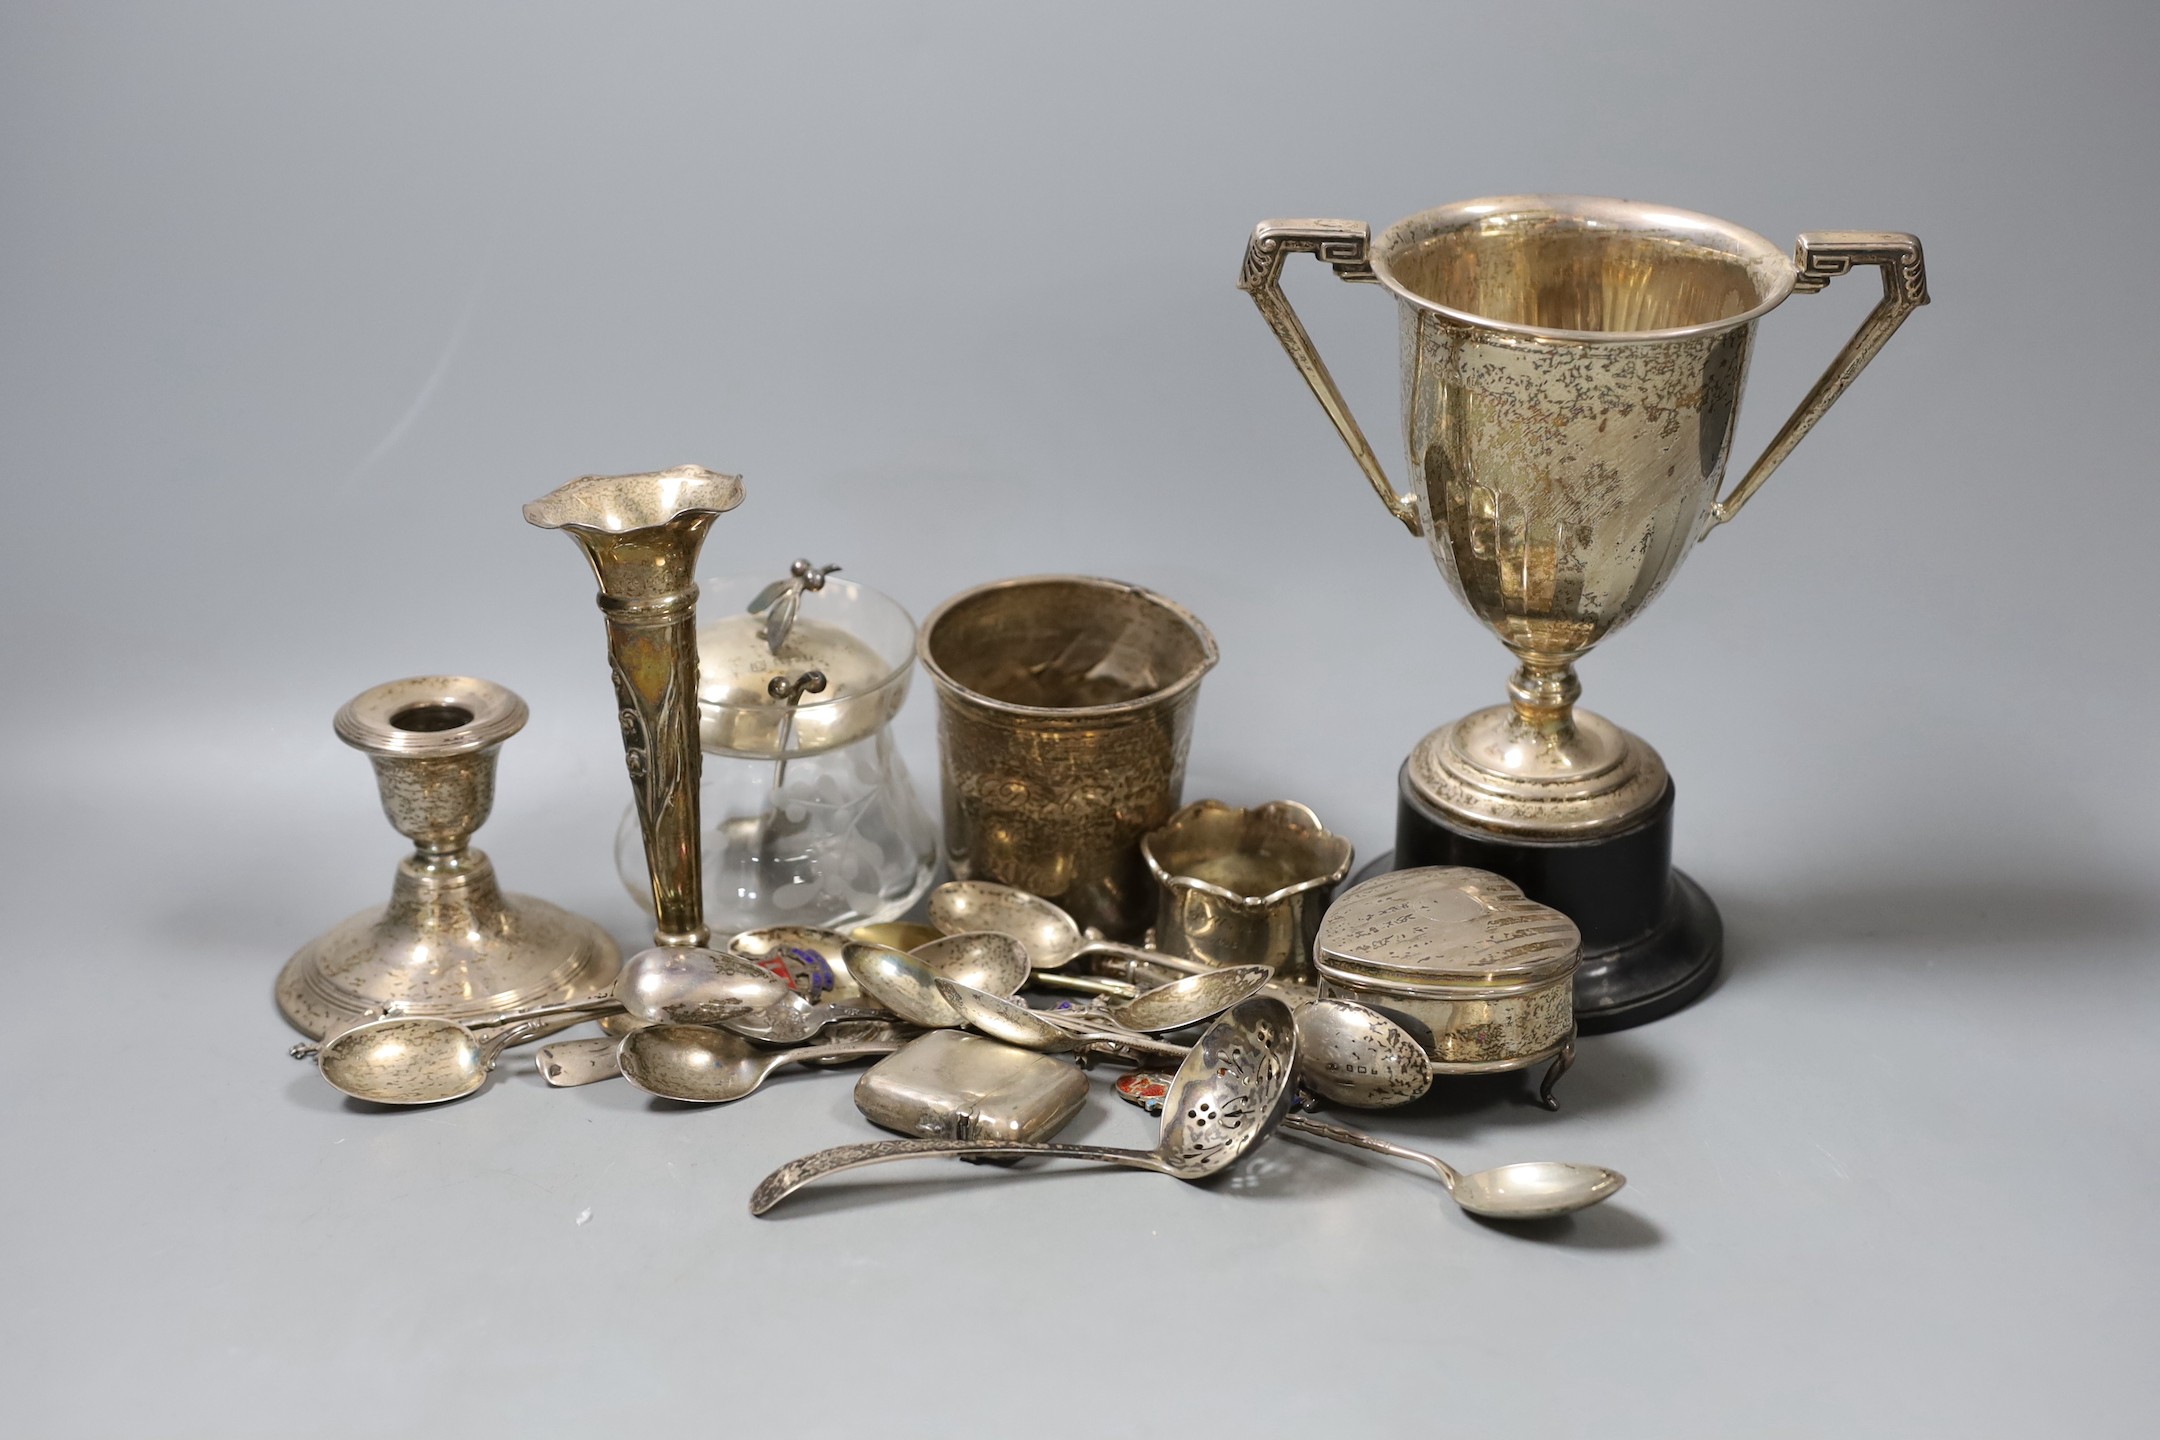 A collection of eighteen small pieces of silver and white metal items, including a silver topped glass preserve jar, trophy cup, flatware, napkin ring, trinket box, etc.